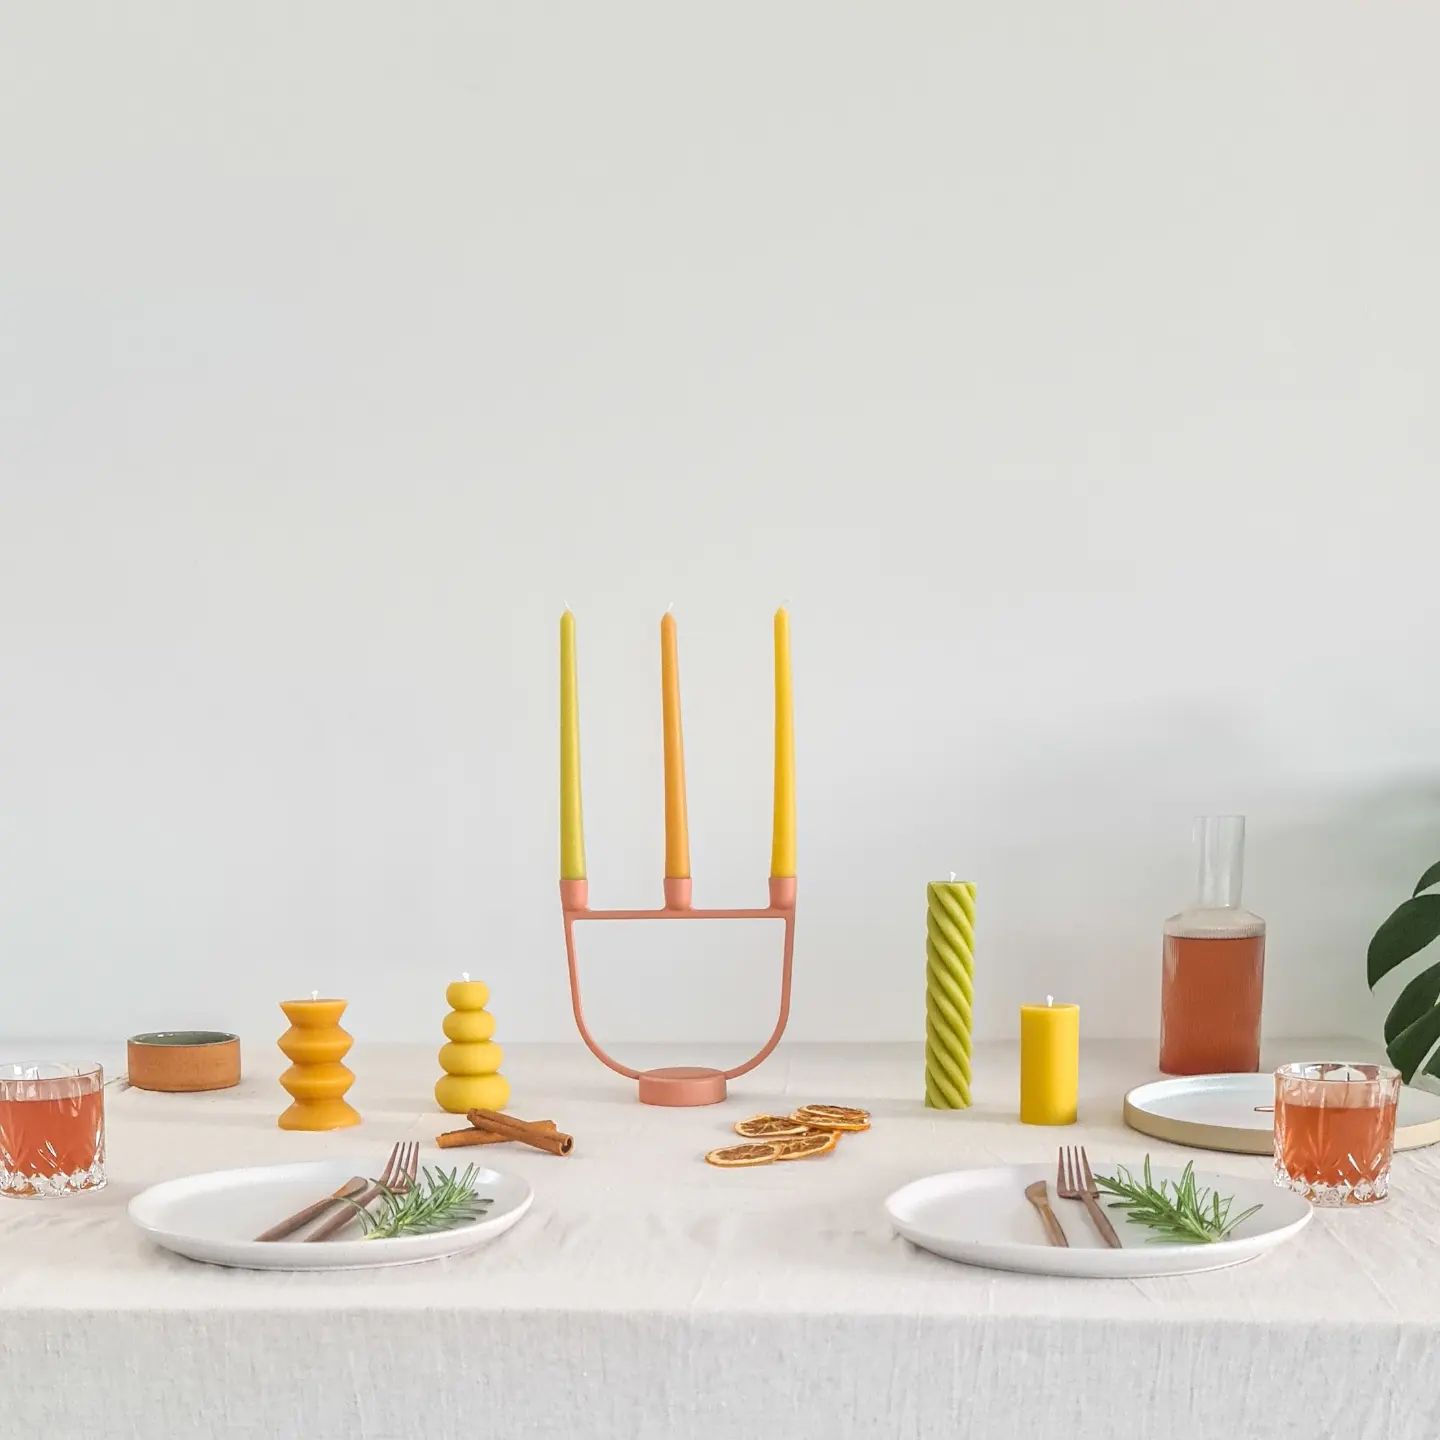 Meet the maker: Someday Candles